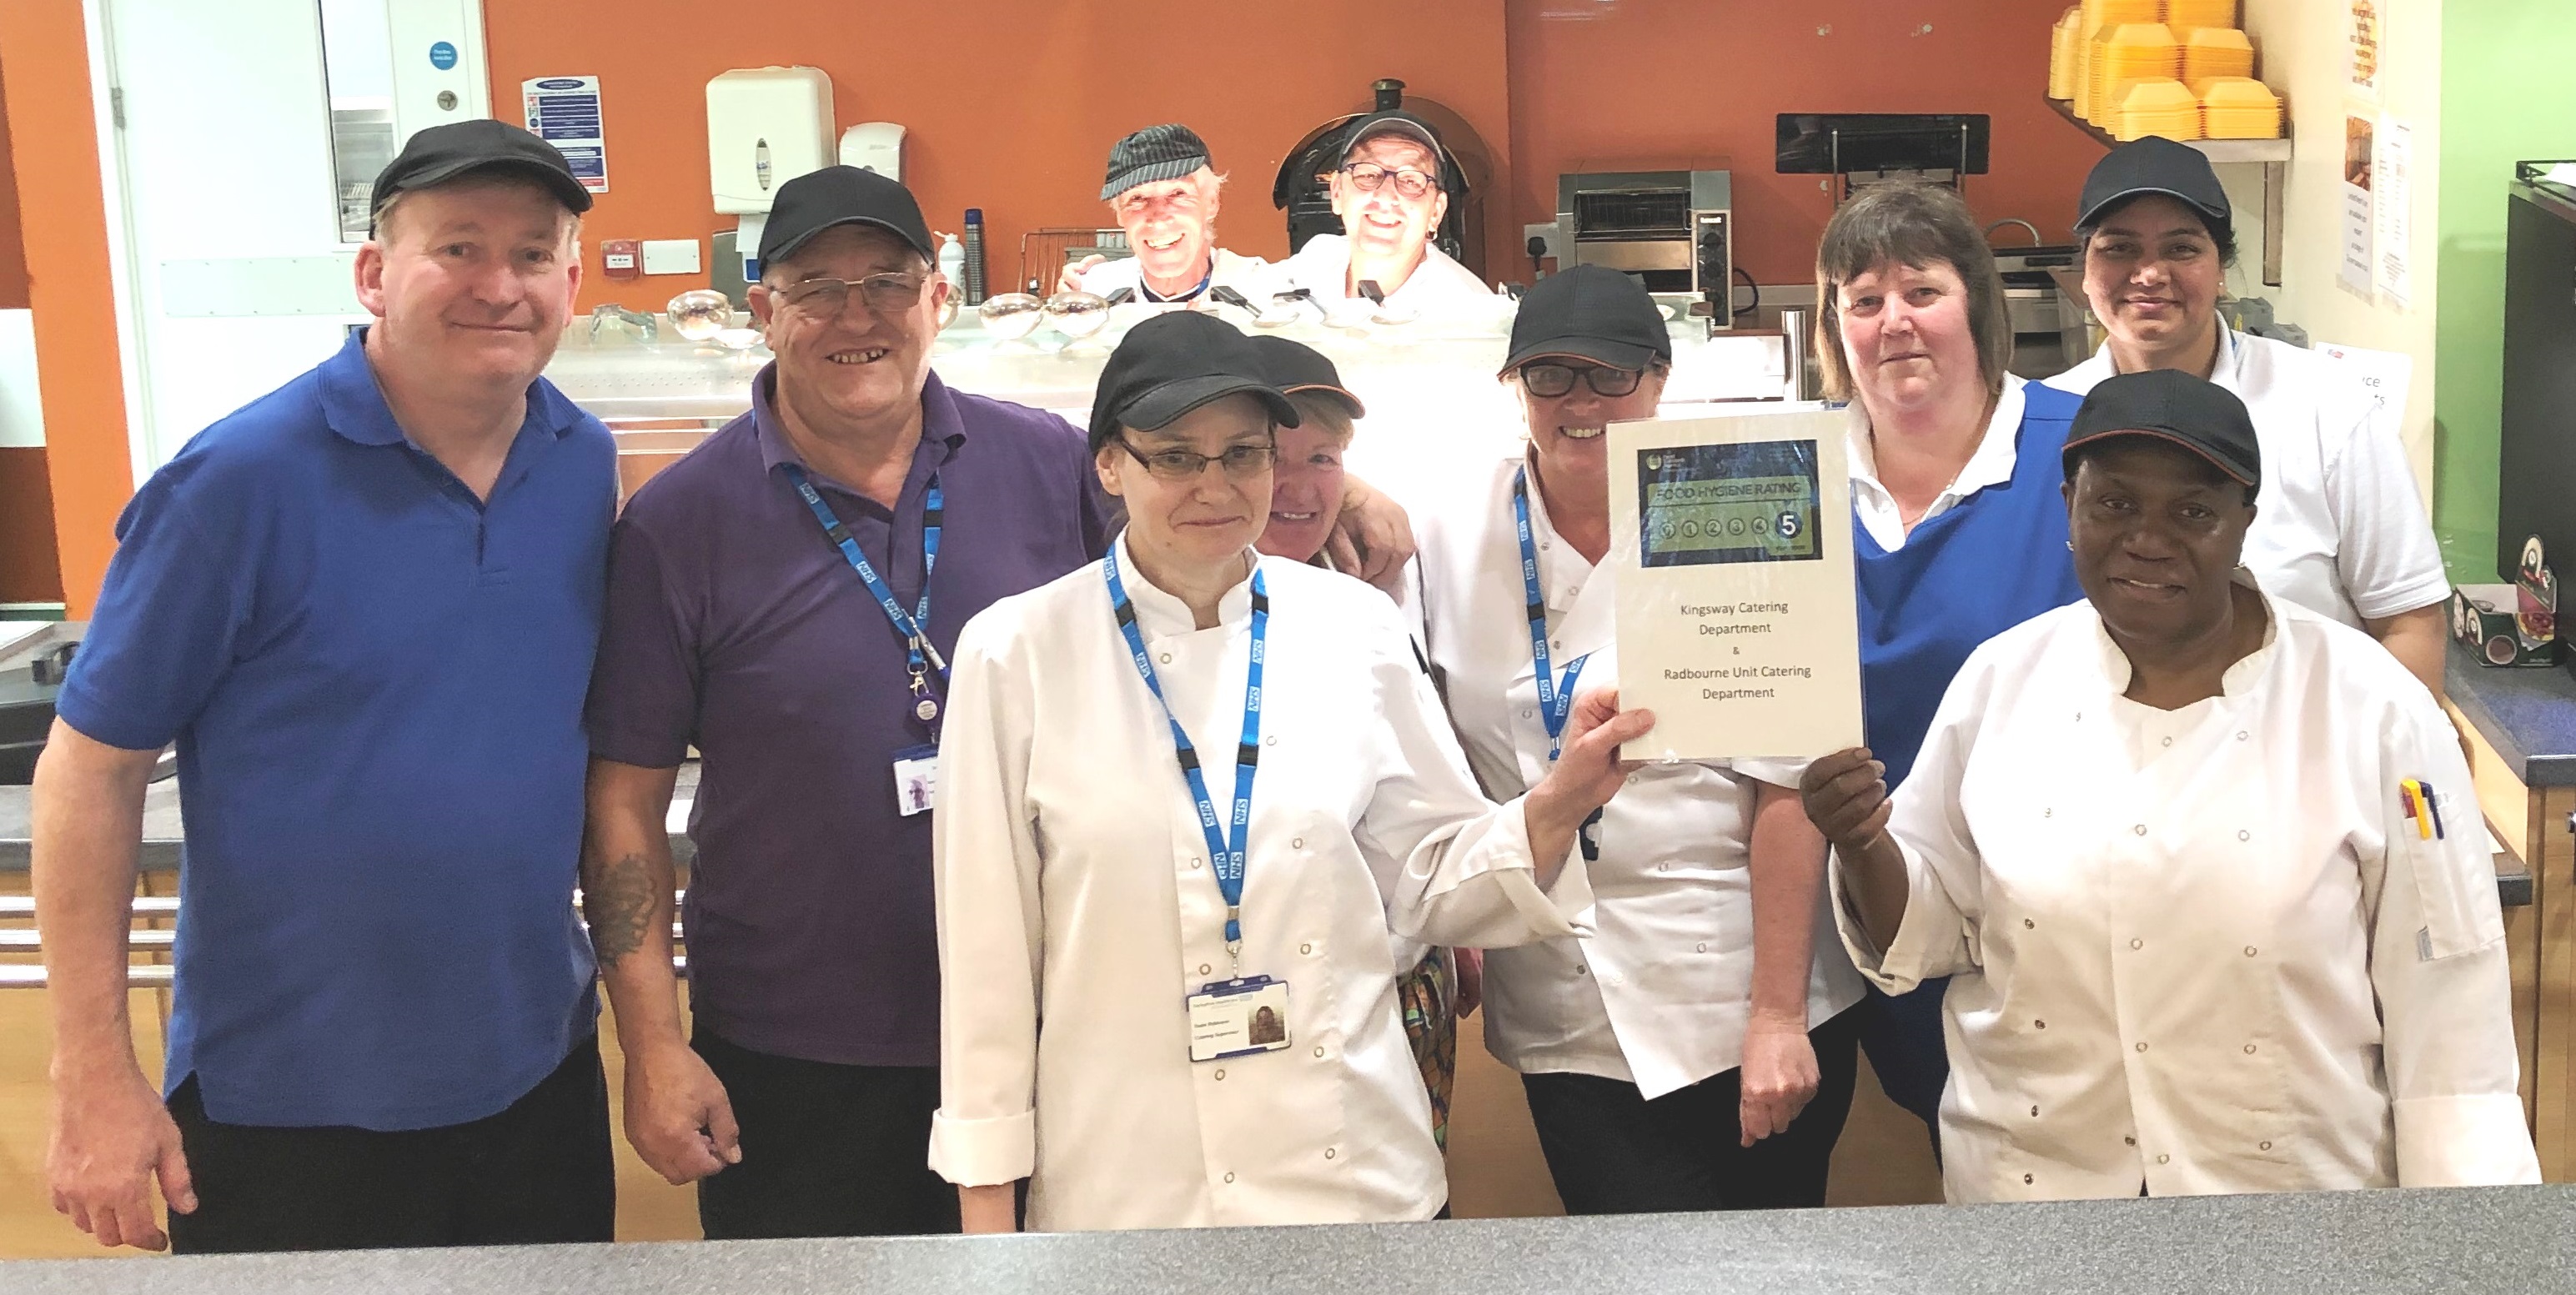 Kitchens given five-star rating – well done to our catering team